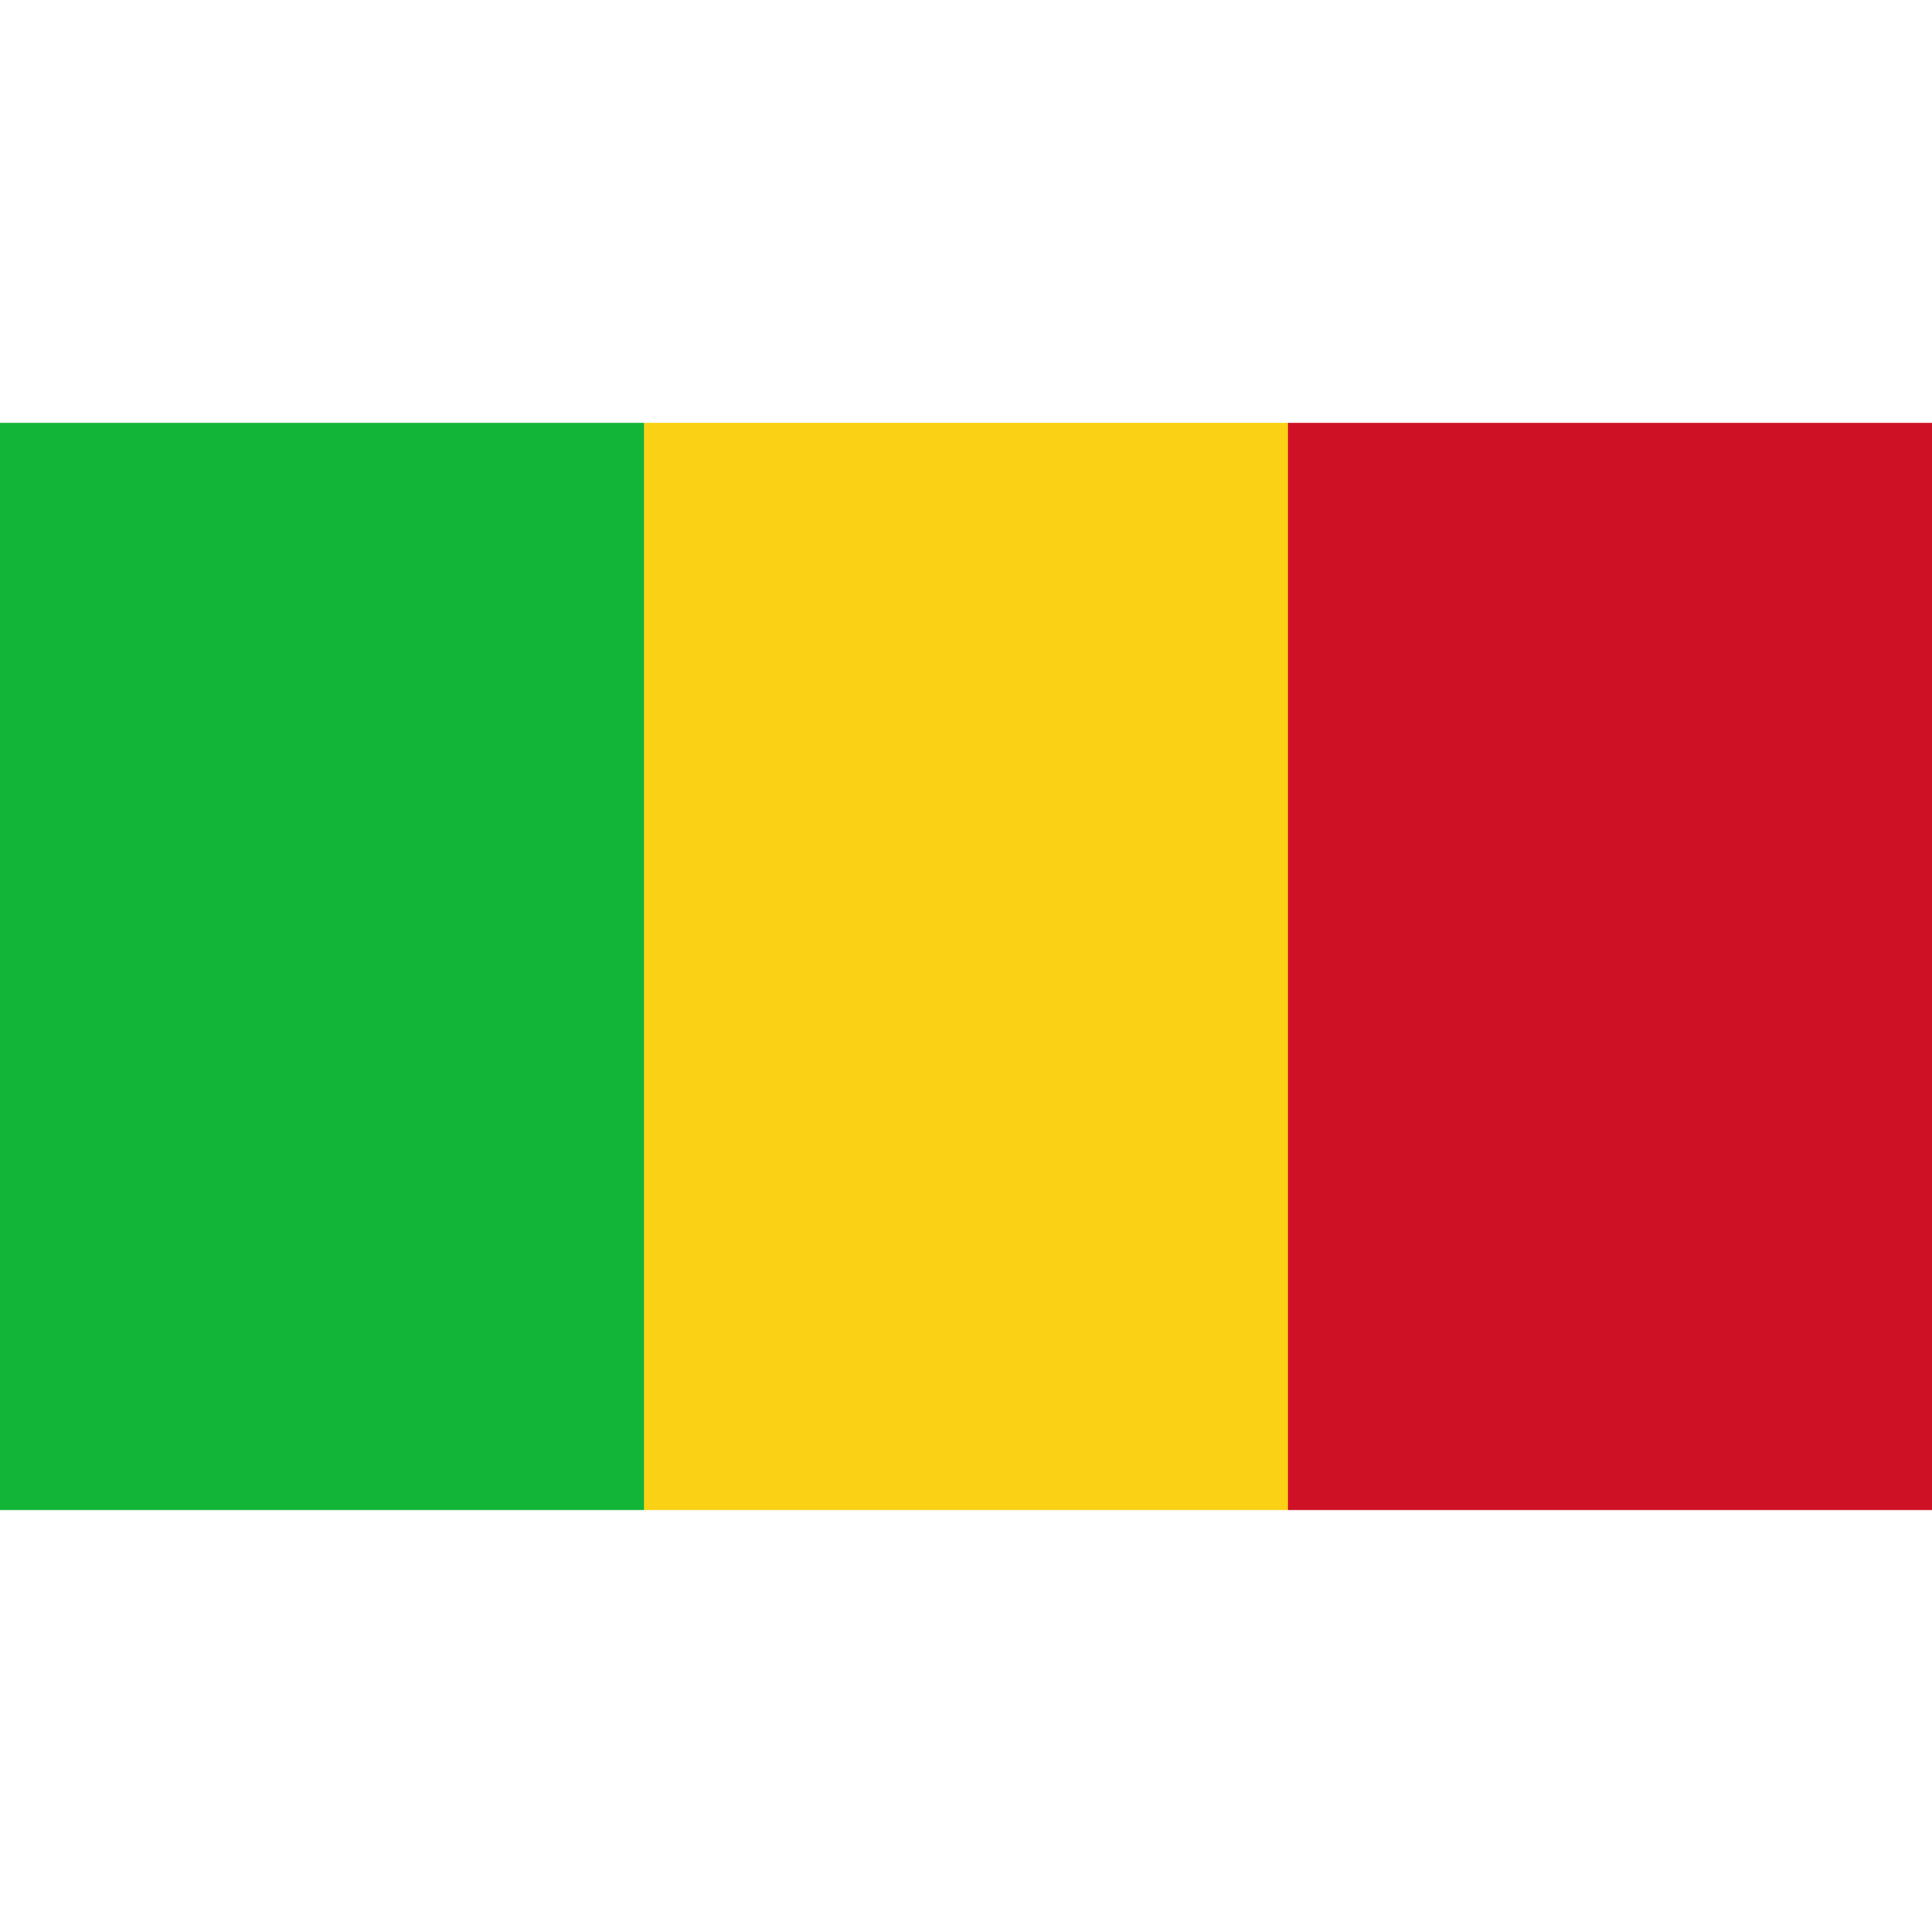 The flag of Mali has three equal vertical bands in green, gold and red.